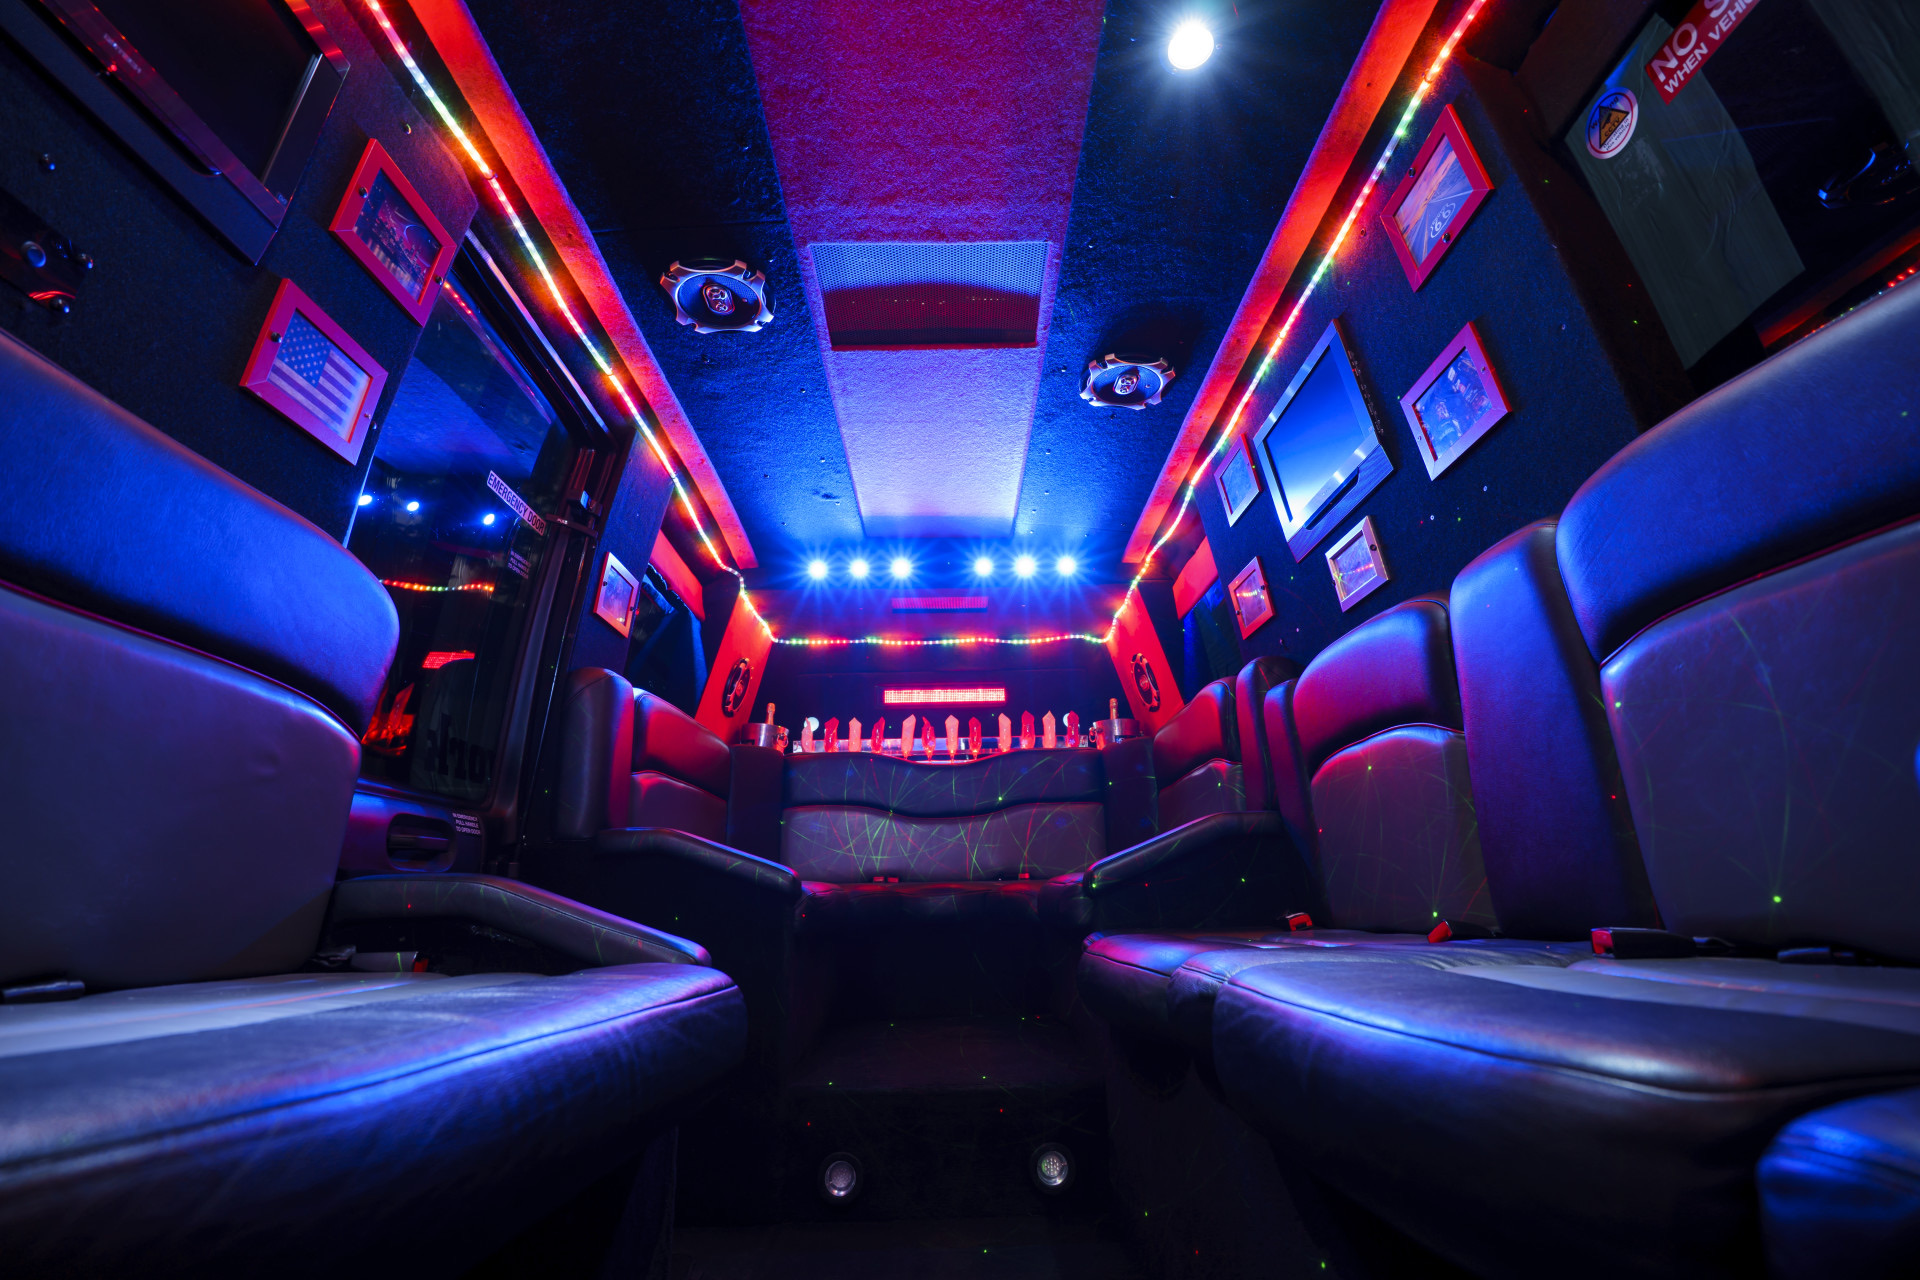 Party Bus Hire: How to Plan an Unforgettable Night Out